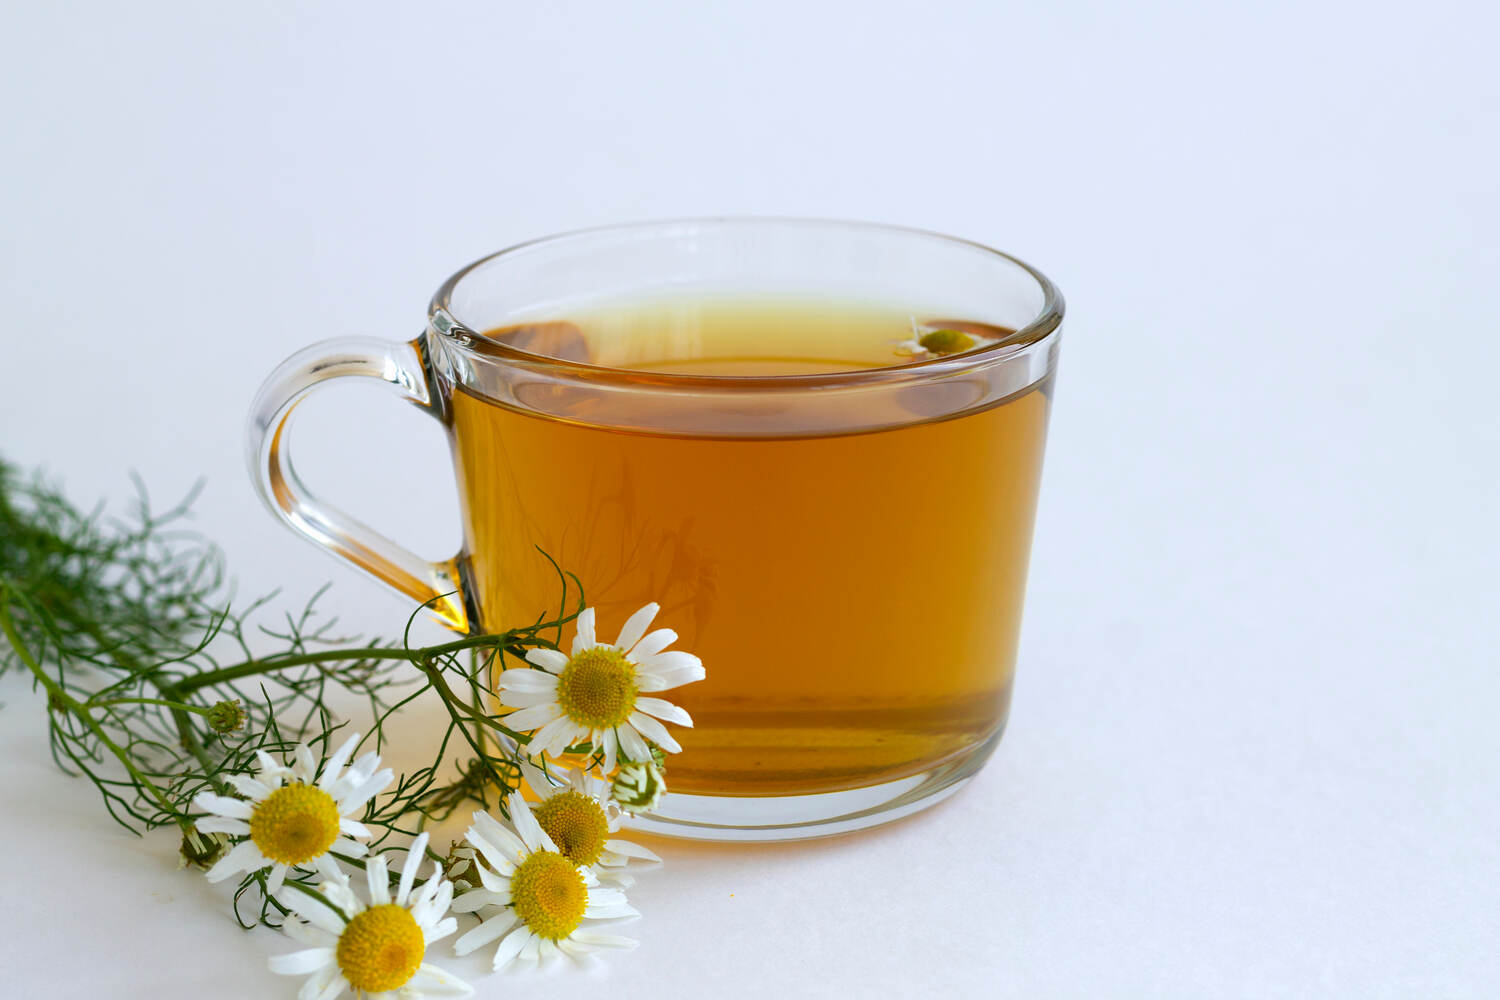 Chamomile is a soothing herb